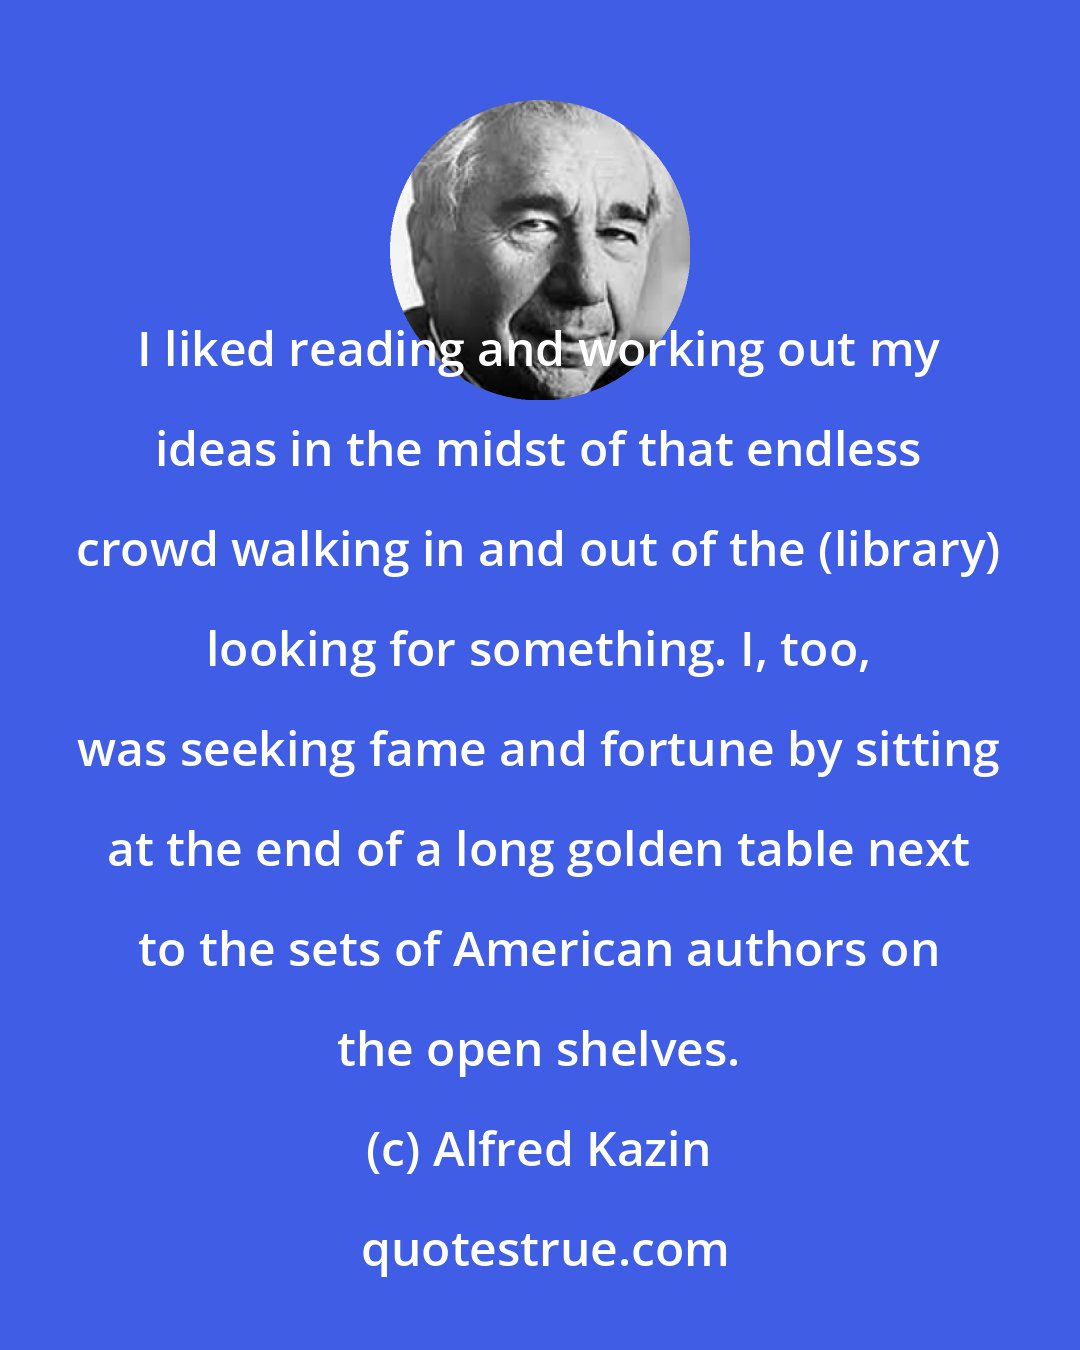 Alfred Kazin: I liked reading and working out my ideas in the midst of that endless crowd walking in and out of the (library) looking for something. I, too, was seeking fame and fortune by sitting at the end of a long golden table next to the sets of American authors on the open shelves.